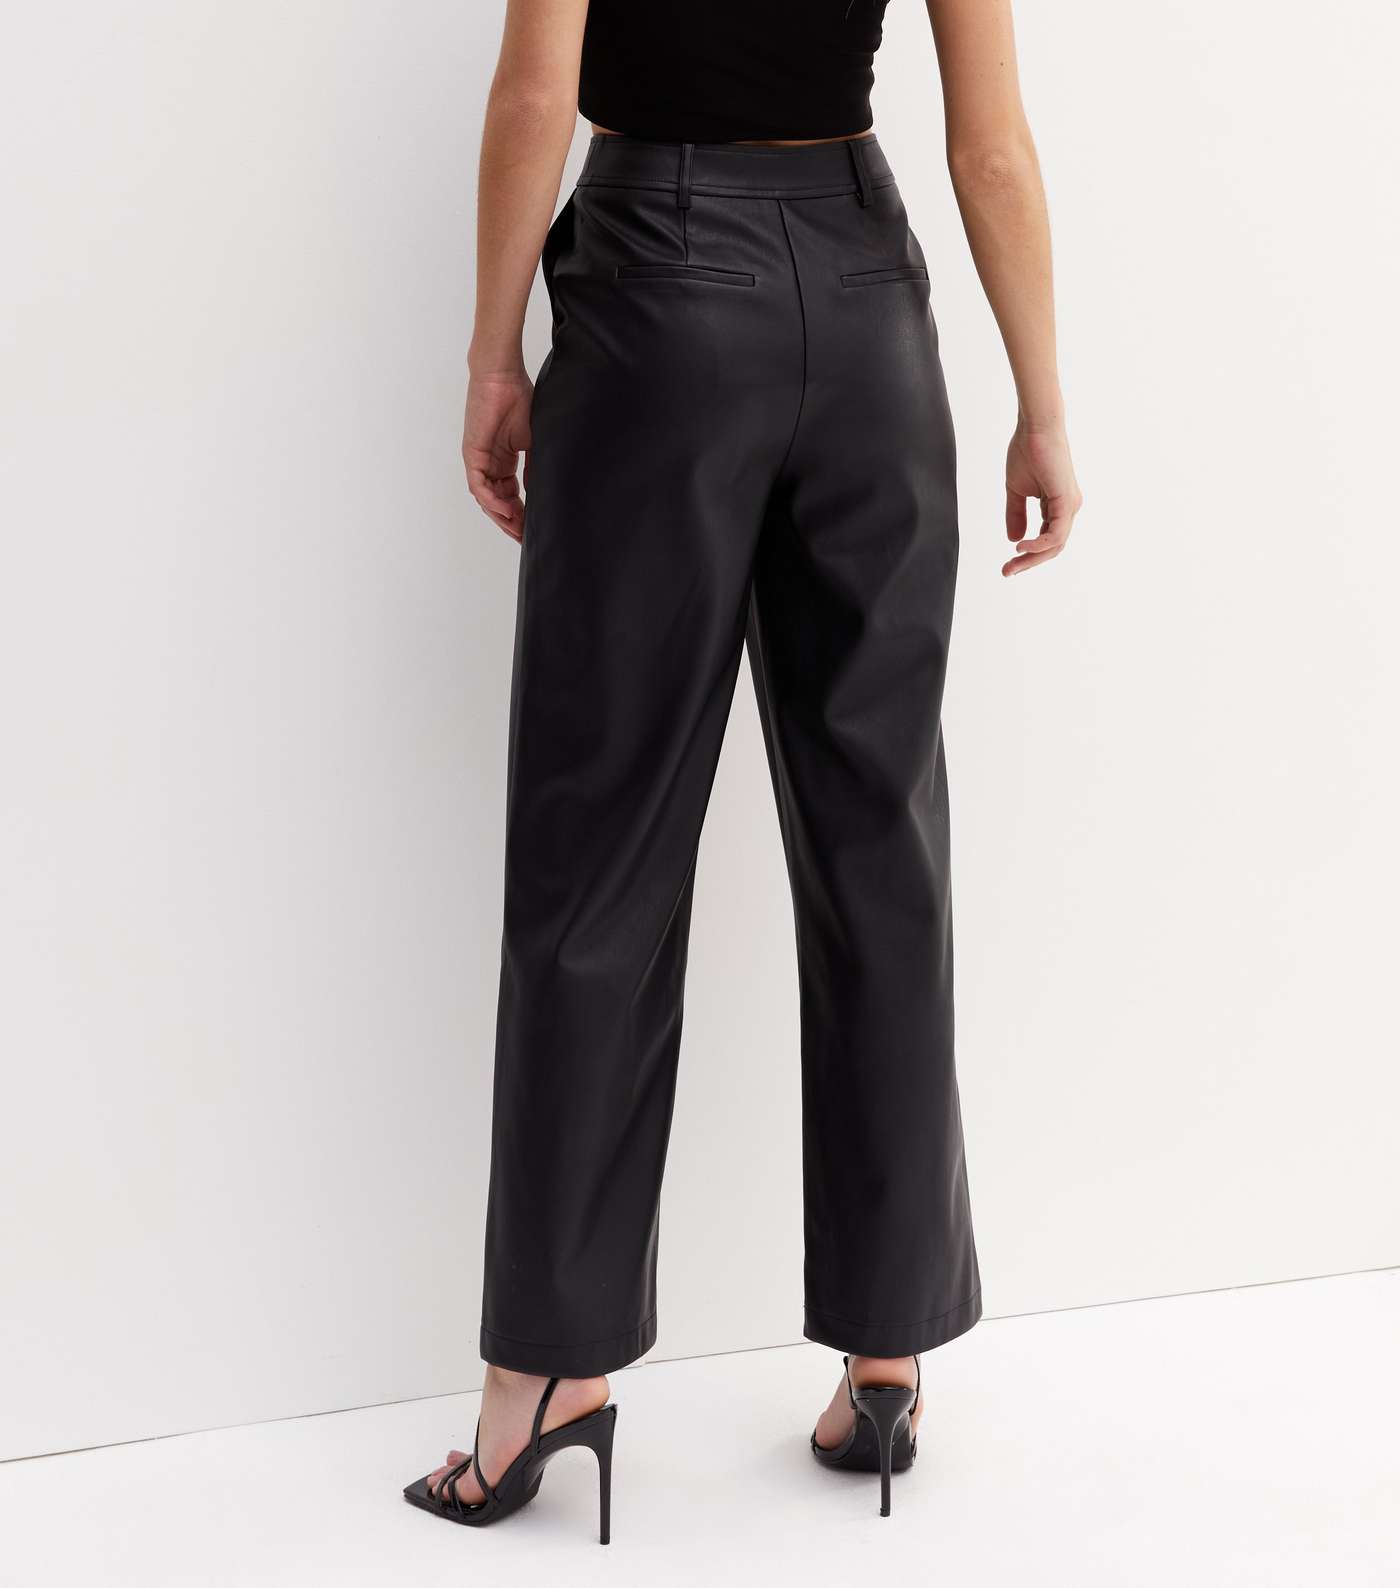 Black Leather-Look Wide Leg Trousers Image 4